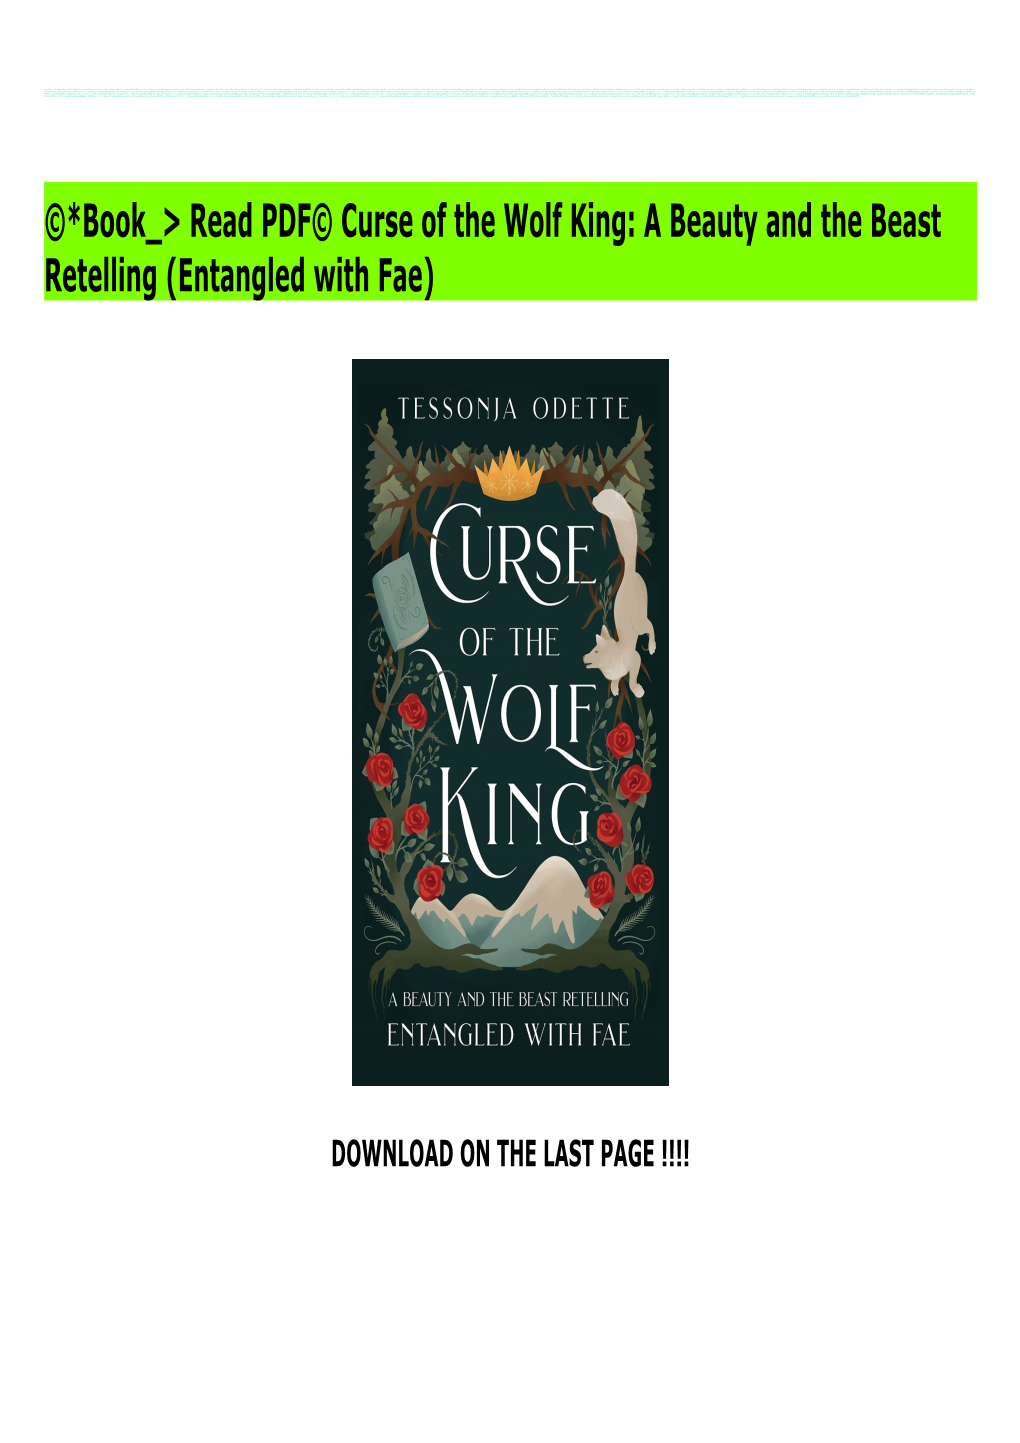 ©*Book &gt; Read PDF© Curse of the Wolf King: a Beauty and the Beast